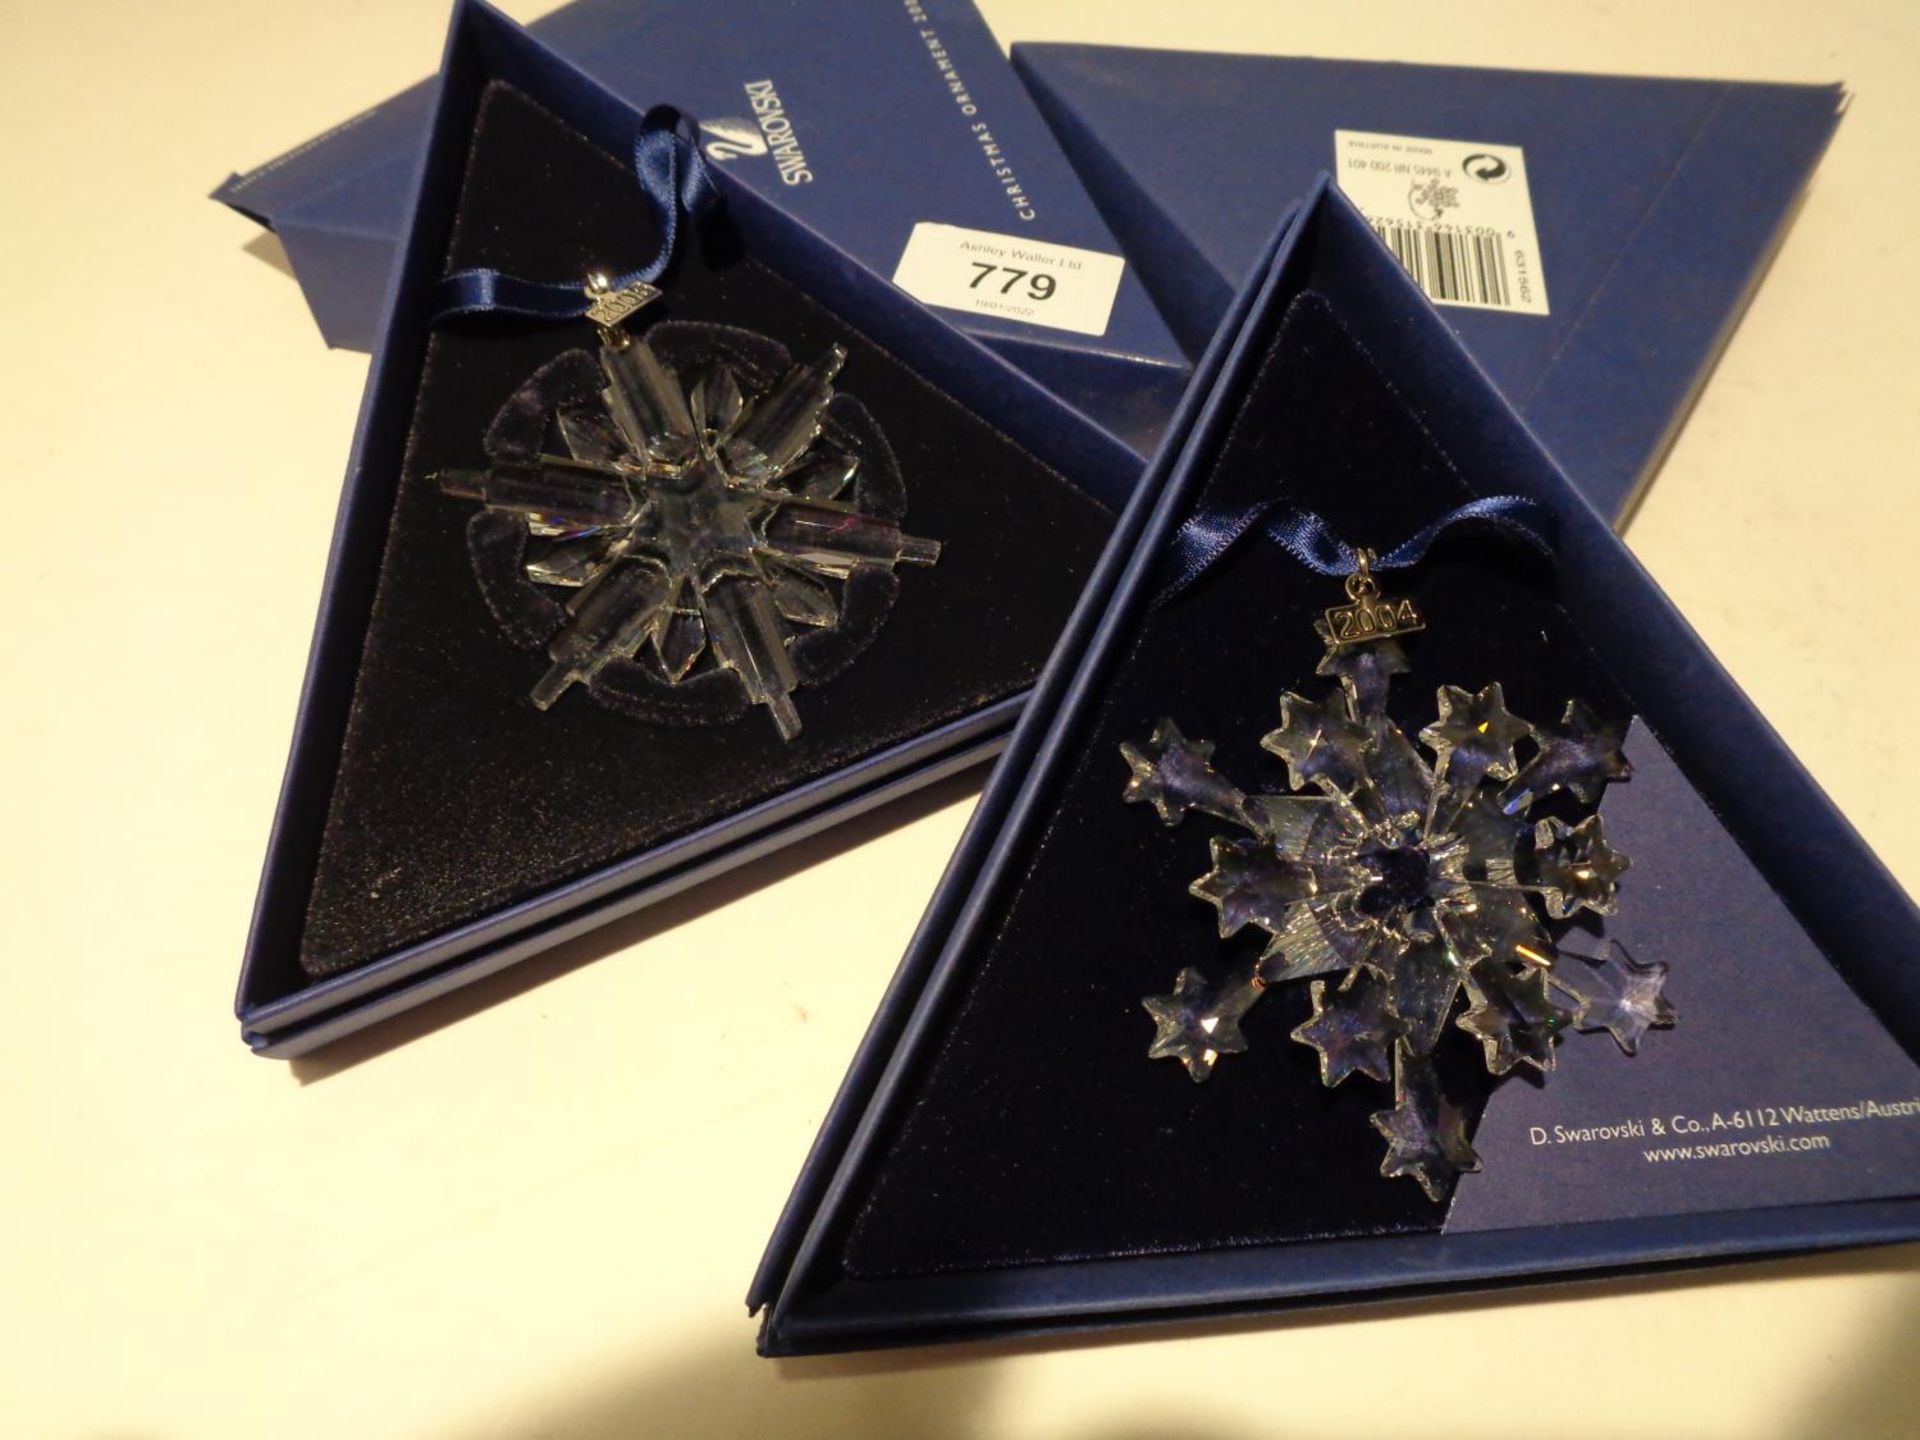 TWO SWAROVSKI ANNUAL EDITION SNOWFLAKE CHRISTMAS ORNAMENTS 2004 & 2006 IN BOXES - Image 2 of 4